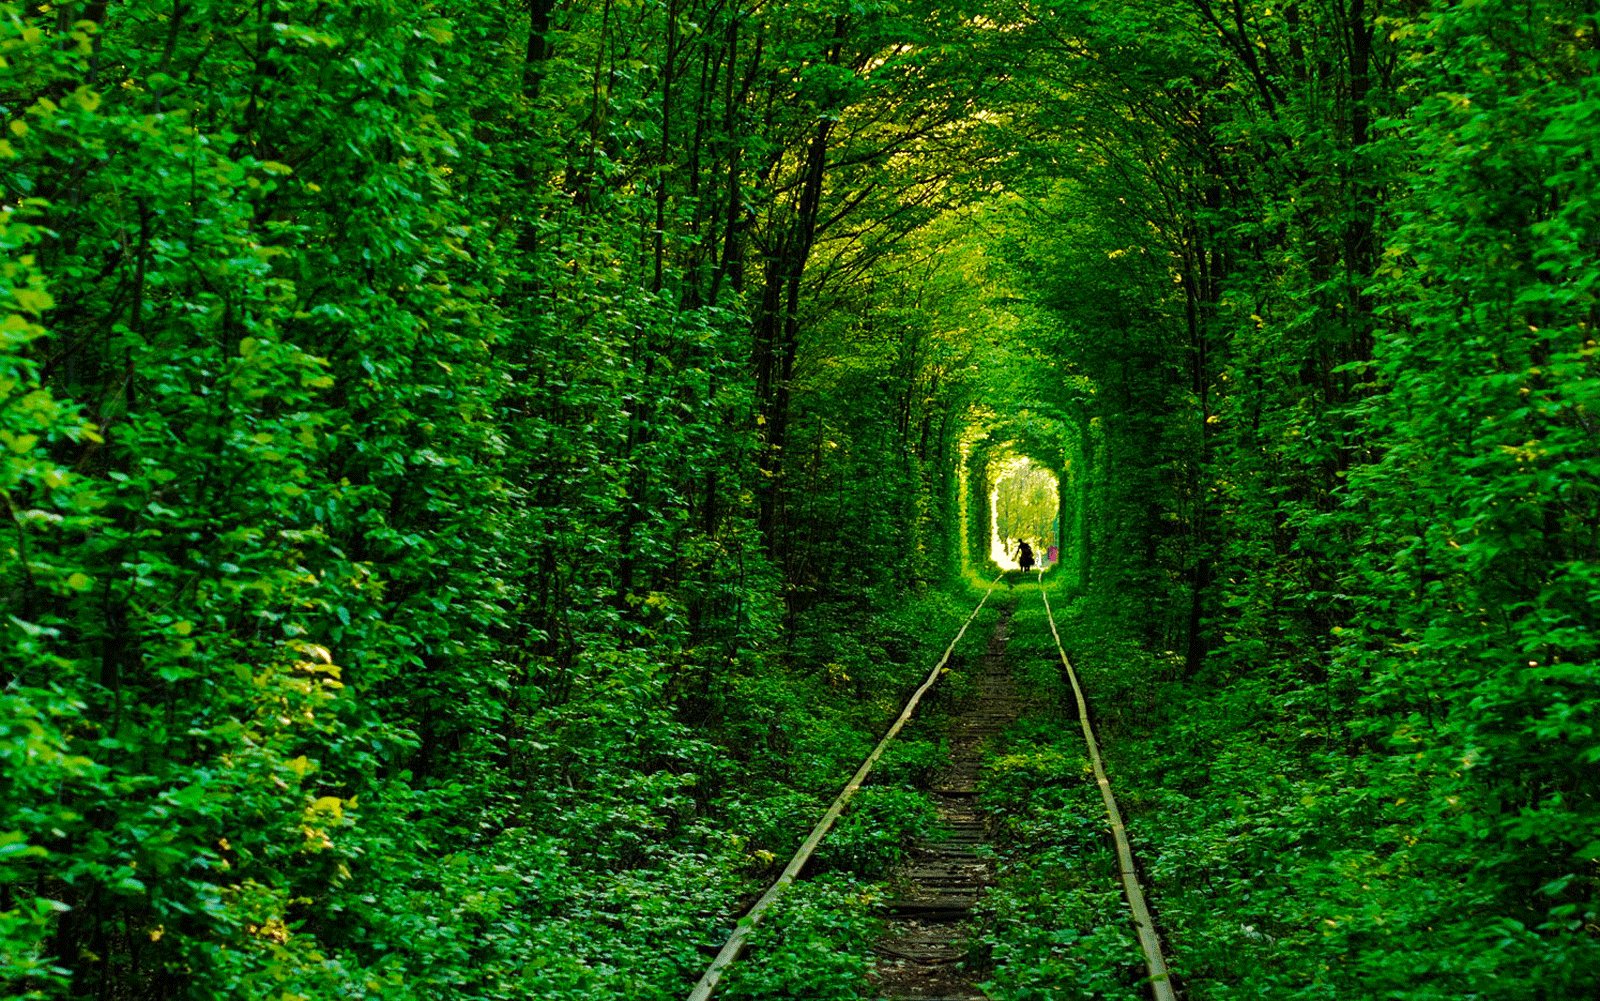 How to walk through Tunnel of Love in Rovno